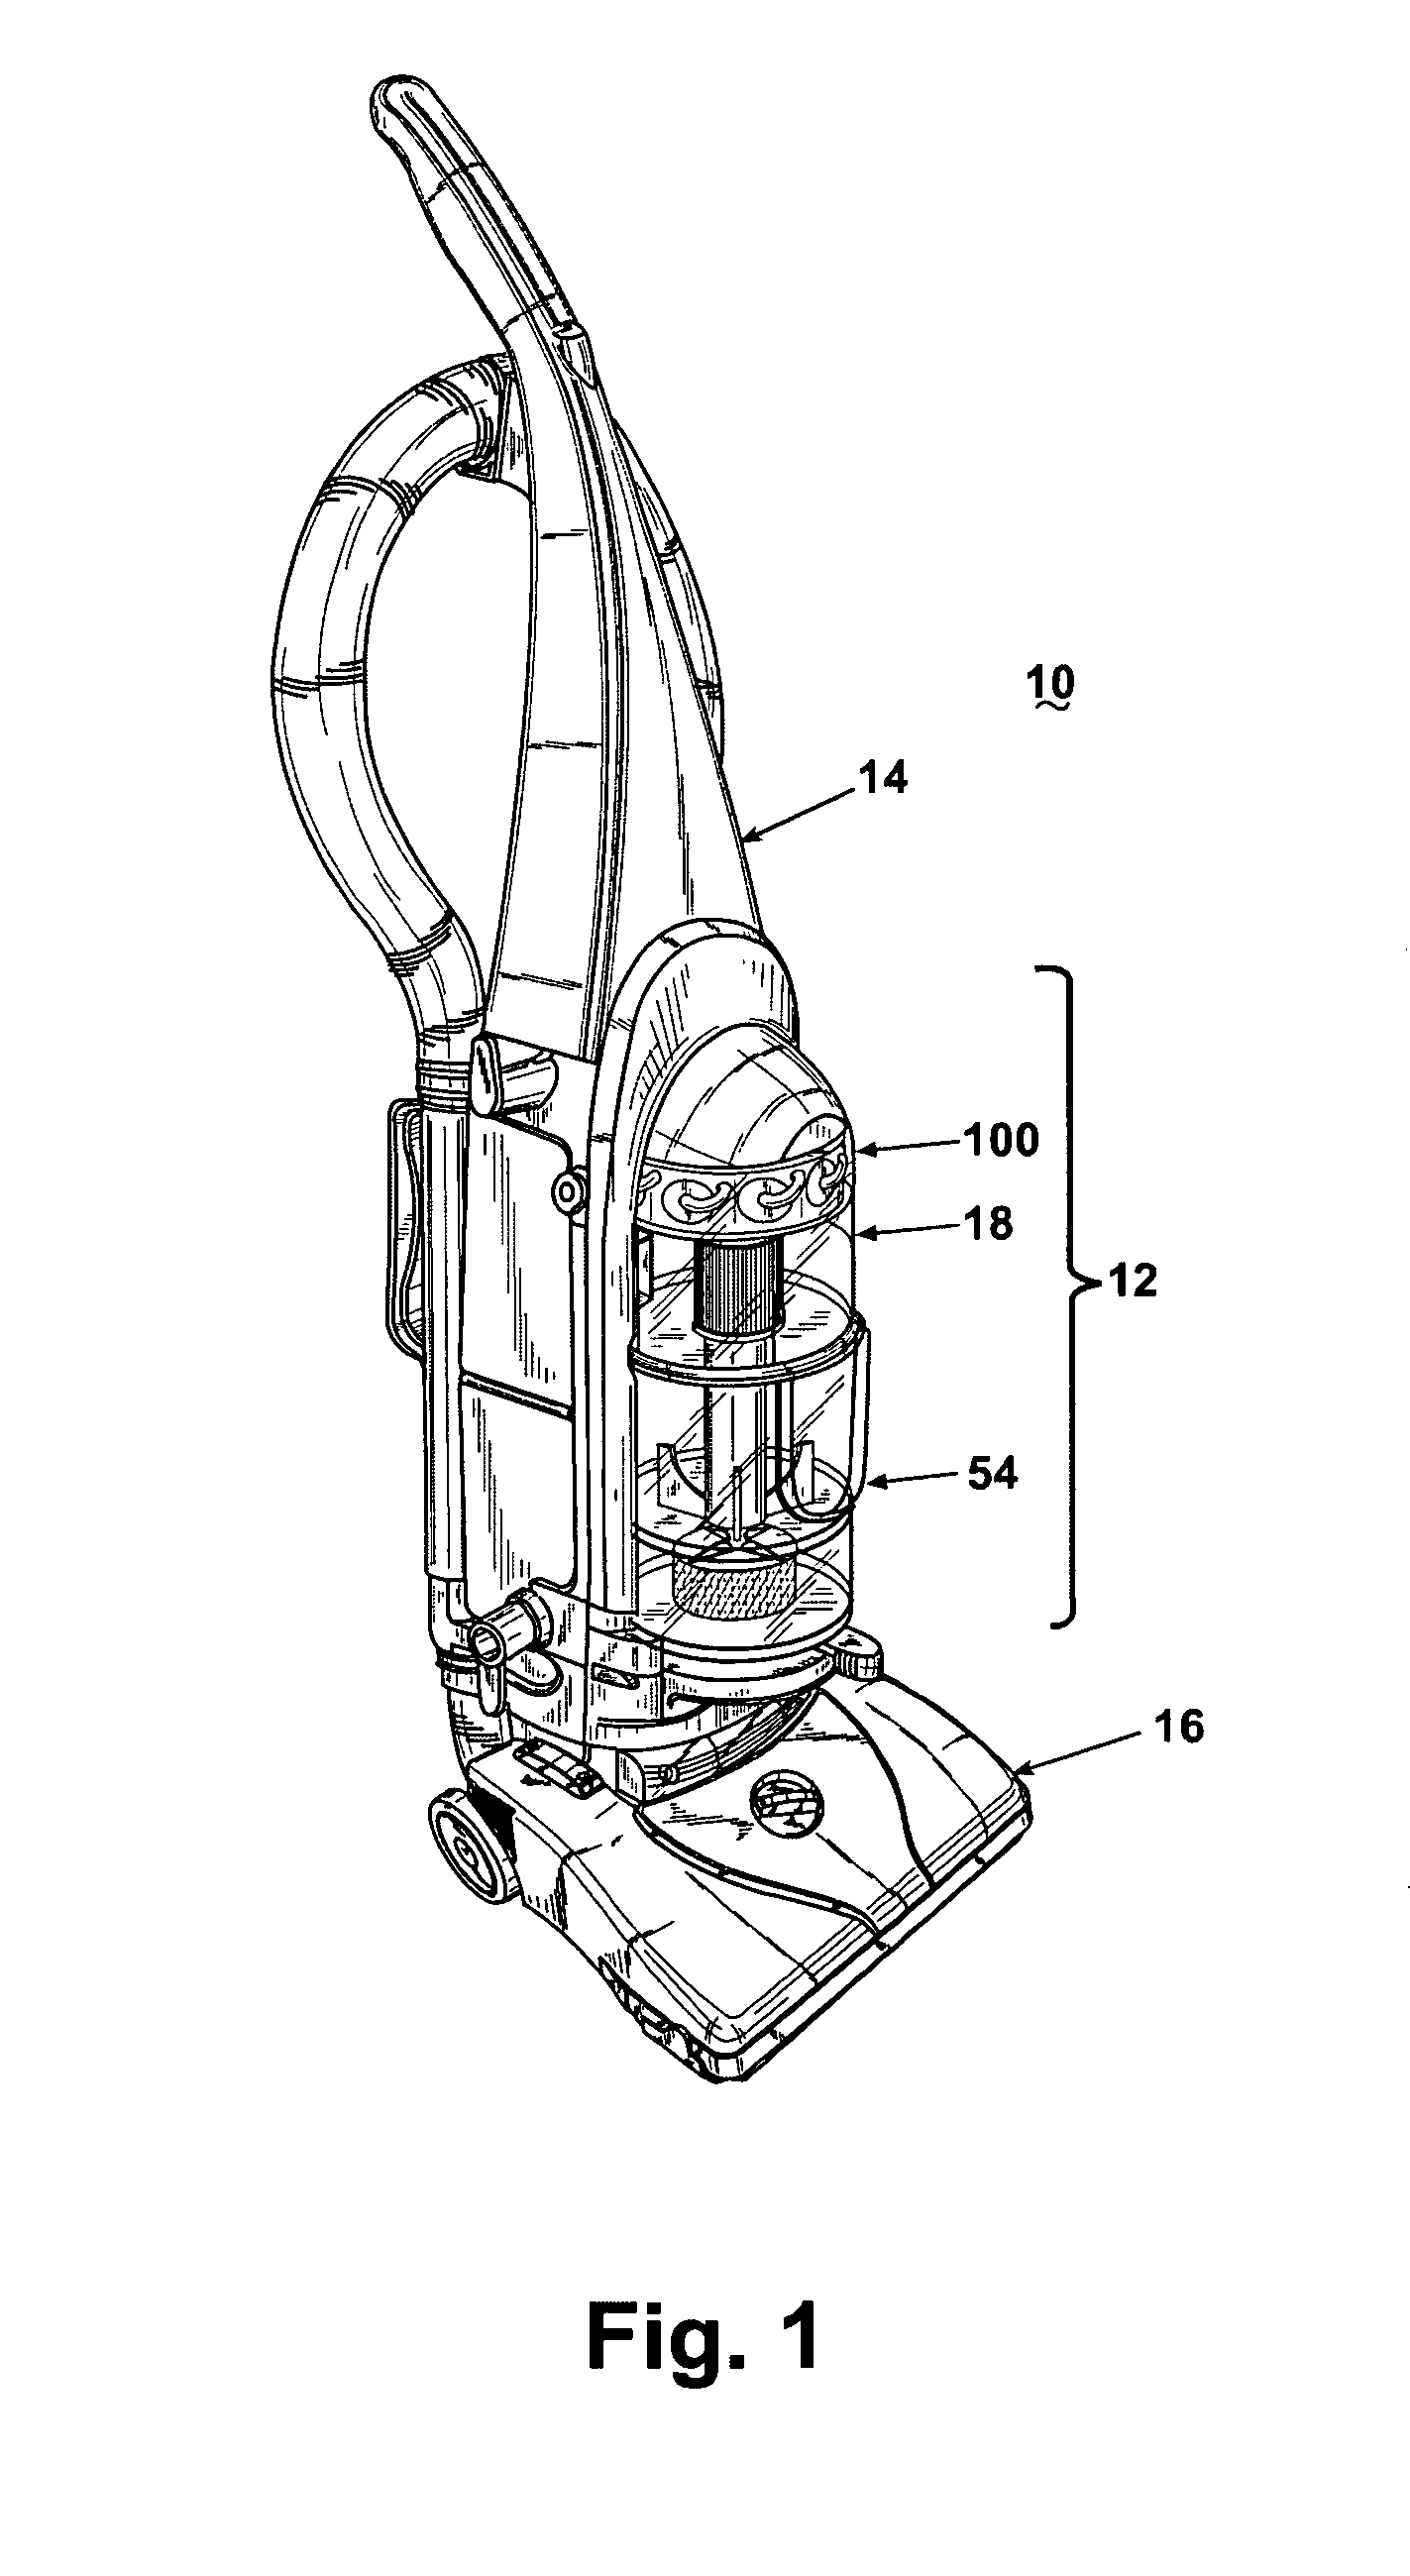 Vacuum cleaner with multiple cyclonic dirt separators and bottom discharge dirt cup